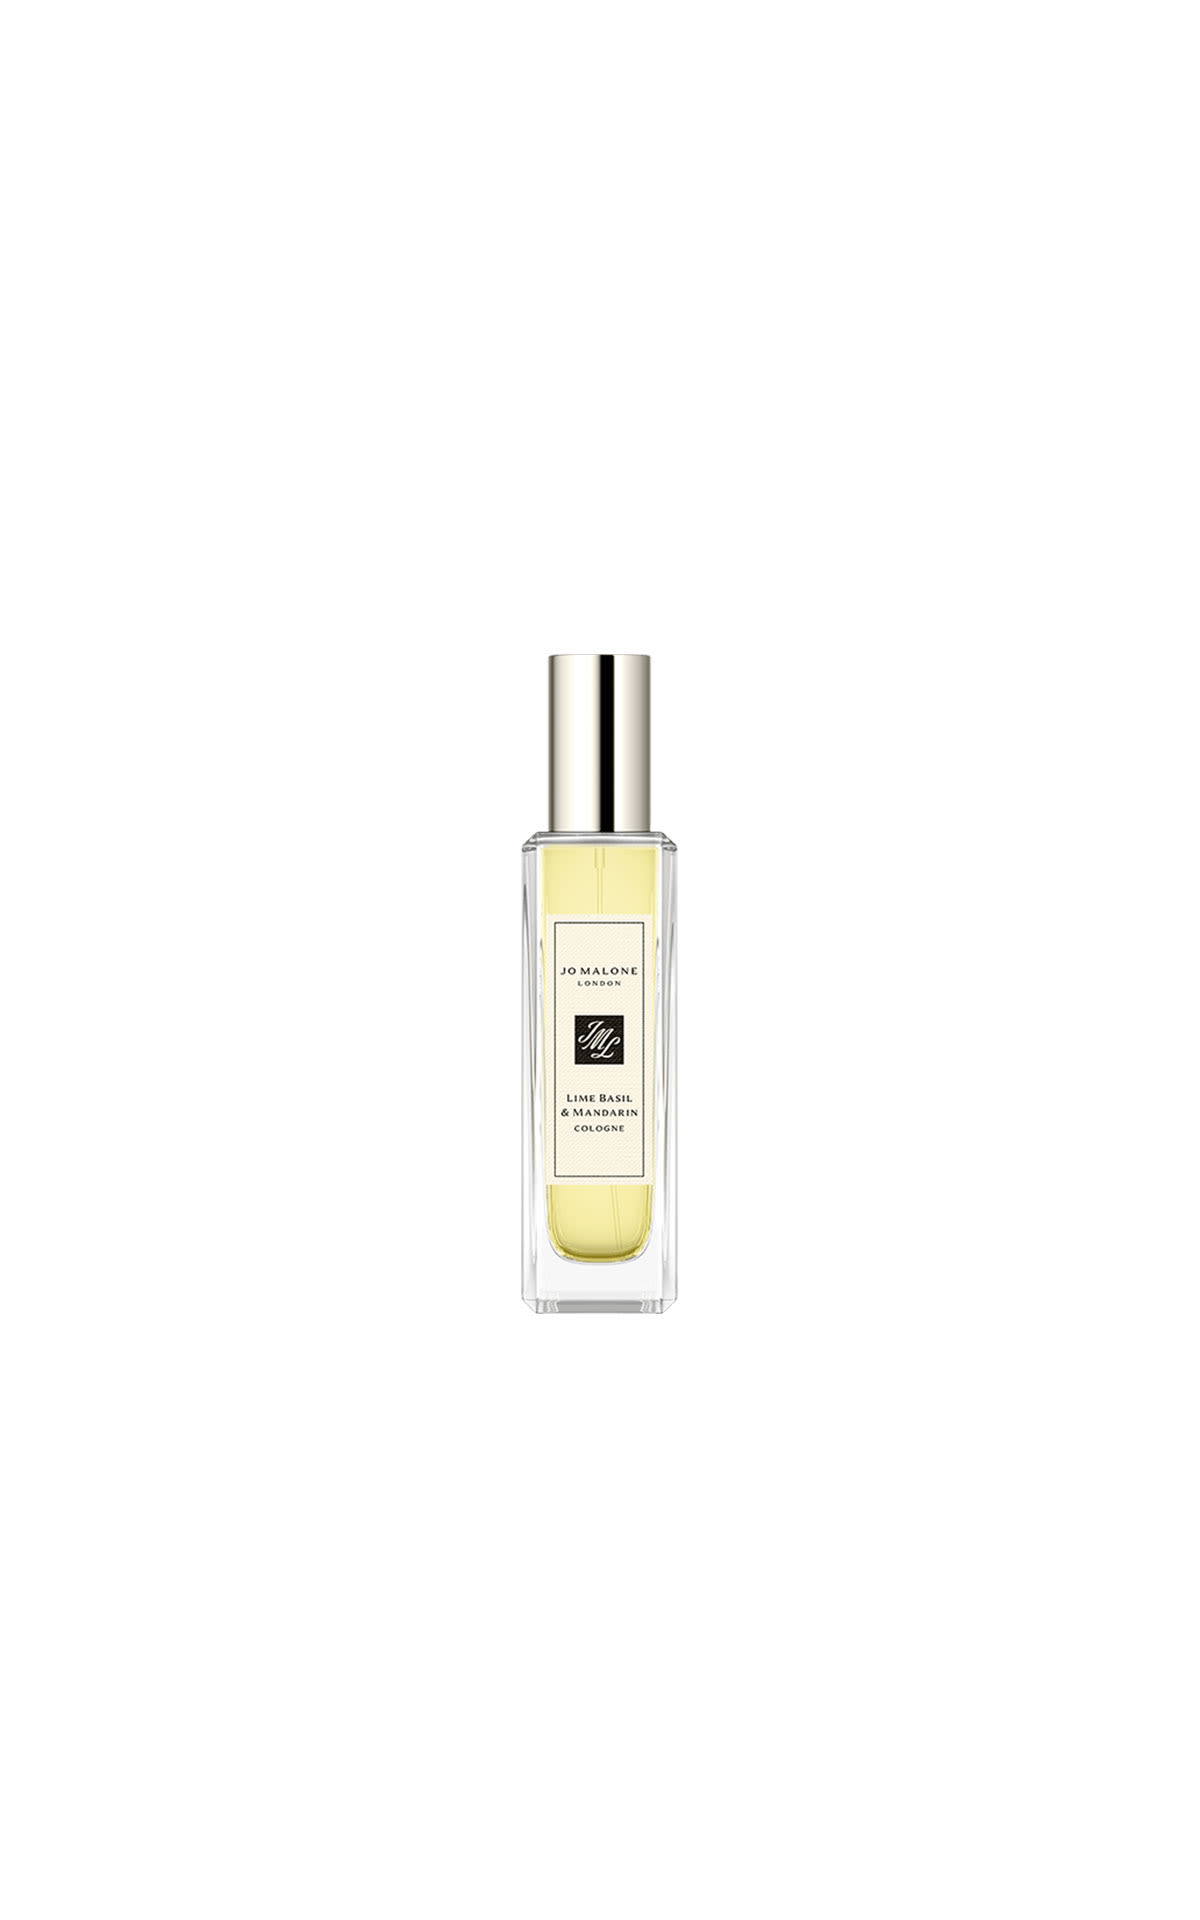 Jo Malone Lime basil and mandarin cologne 30ml from Bicester Village